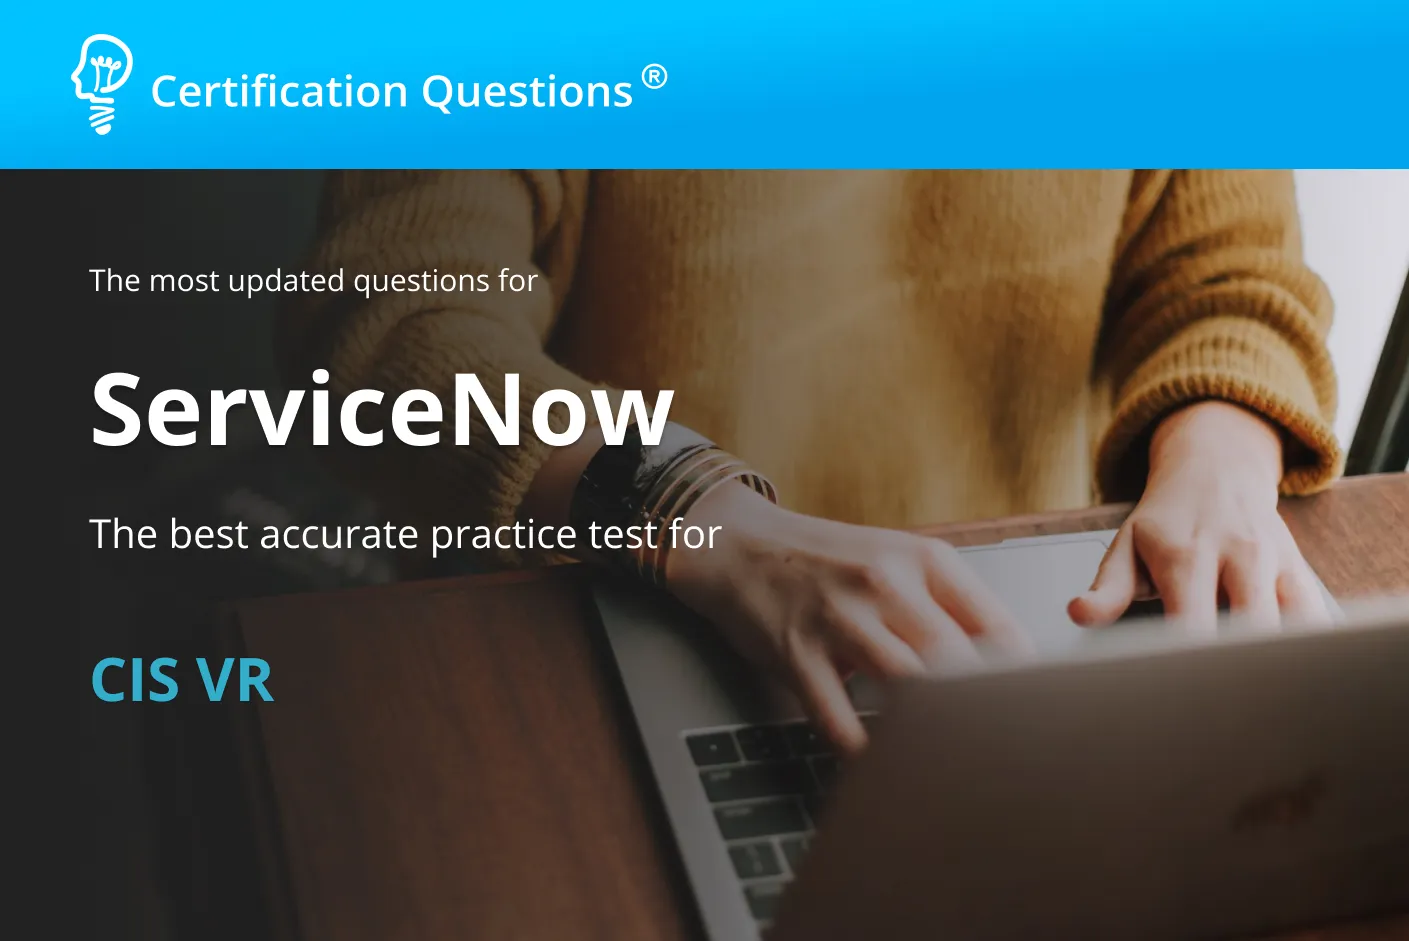 Here is the image for the ServiceNow CIS VR exam in the United States of America.